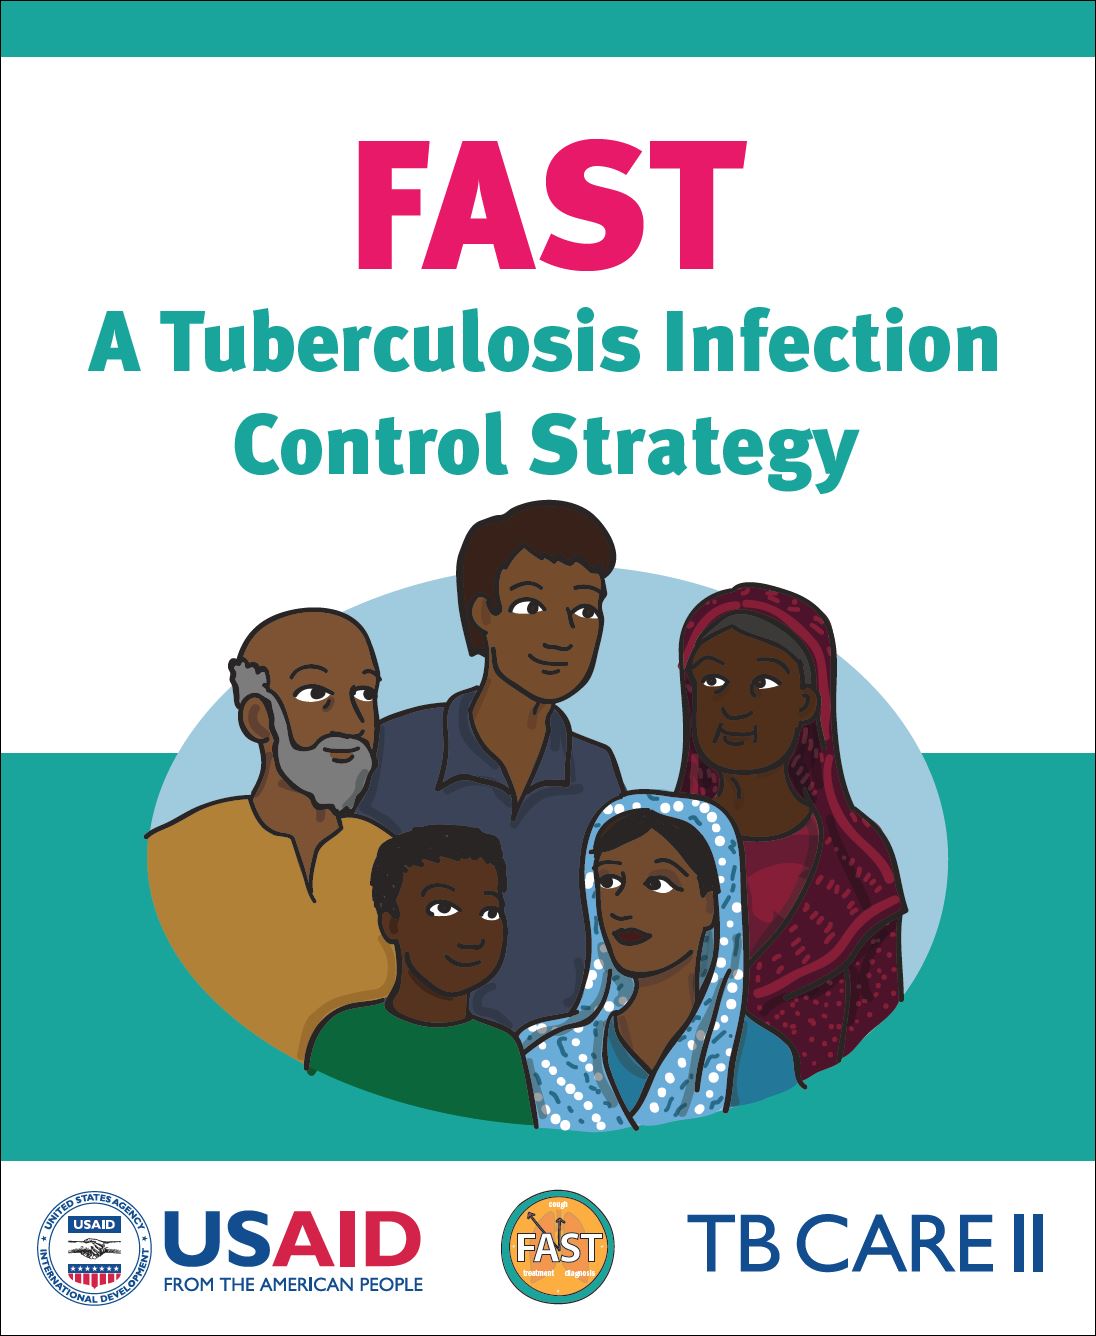 FAST: A Tuberculosis Infection Control Strategy